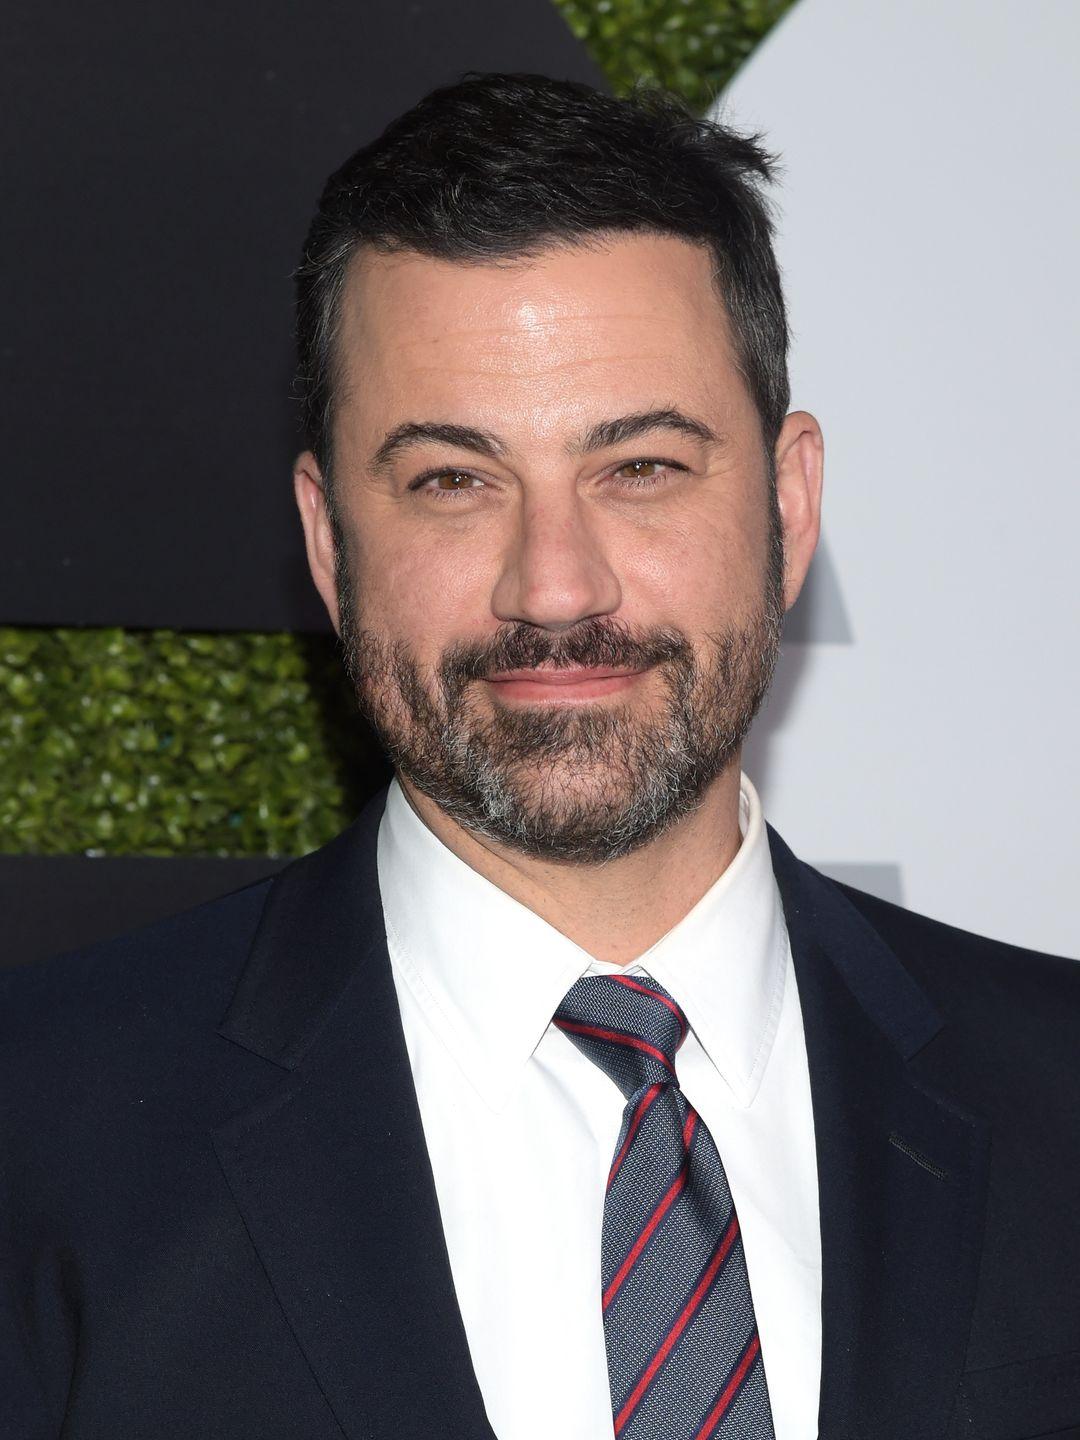 Jimmy Kimmel does he have a wife